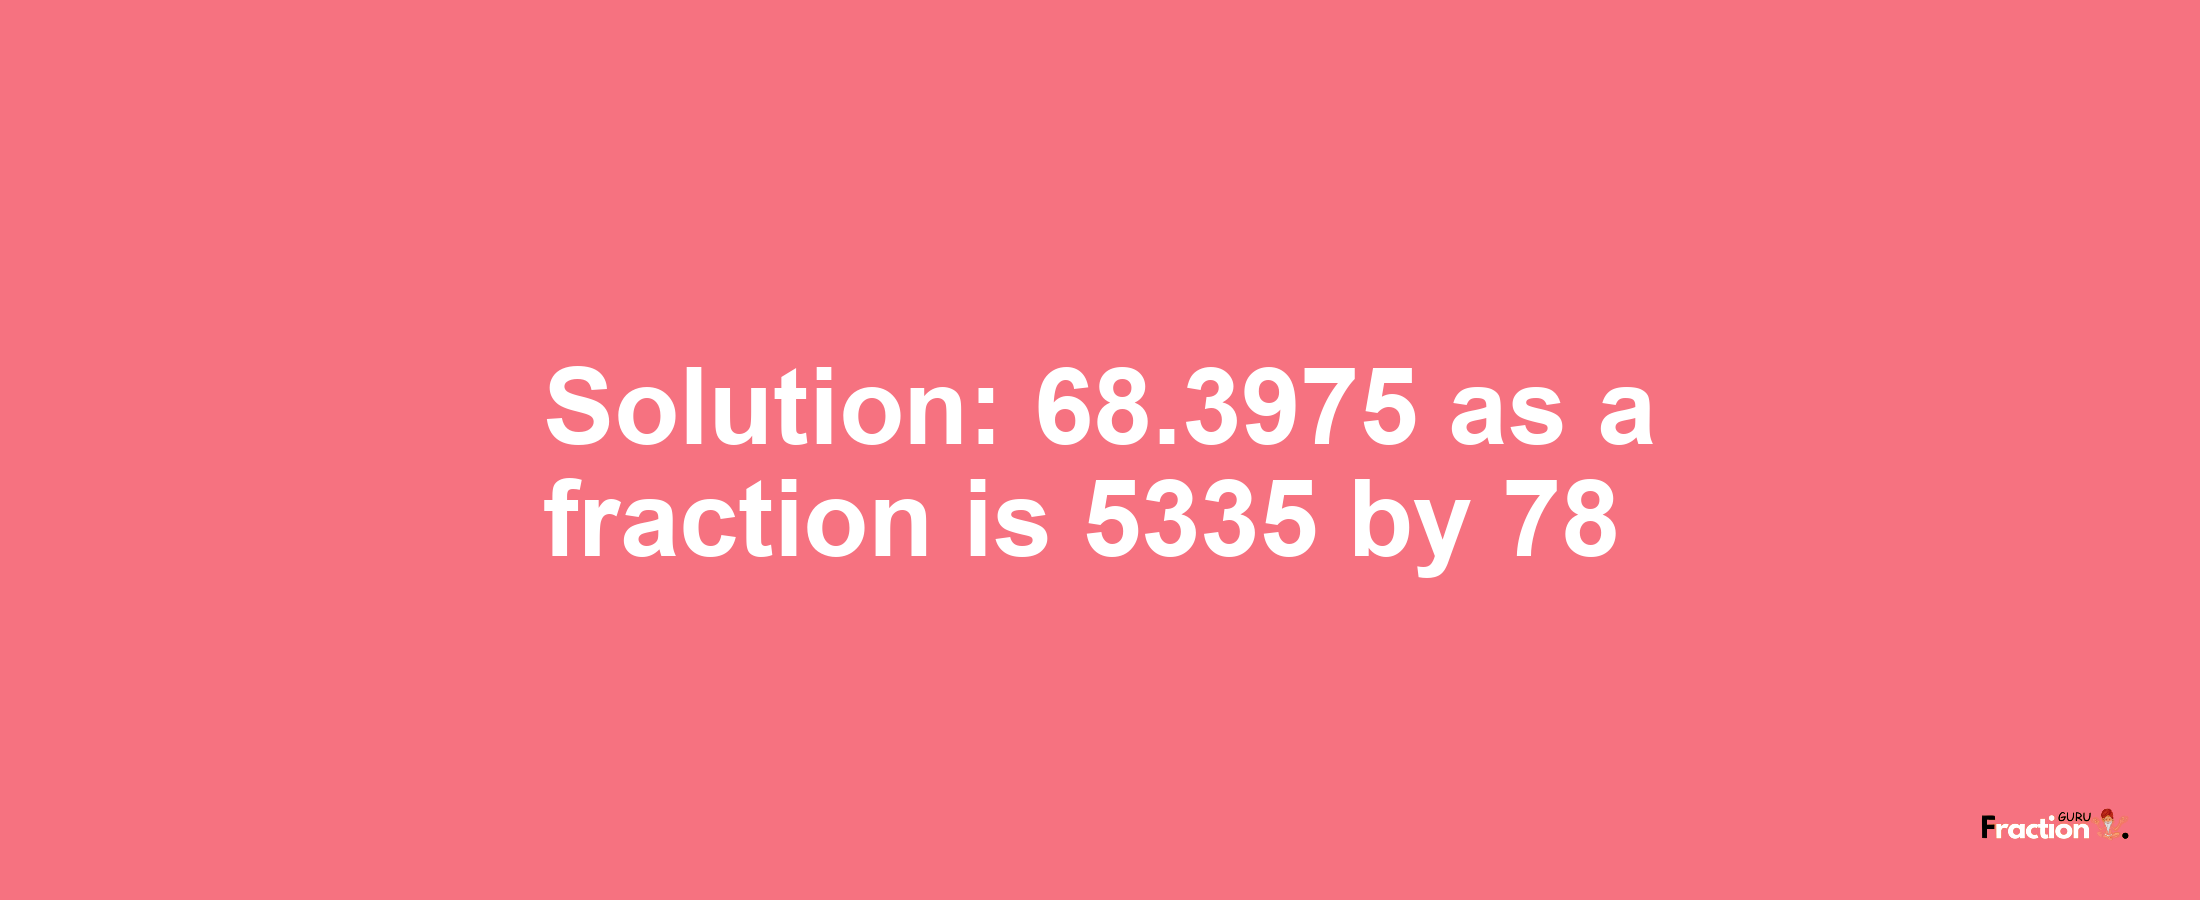 Solution:68.3975 as a fraction is 5335/78